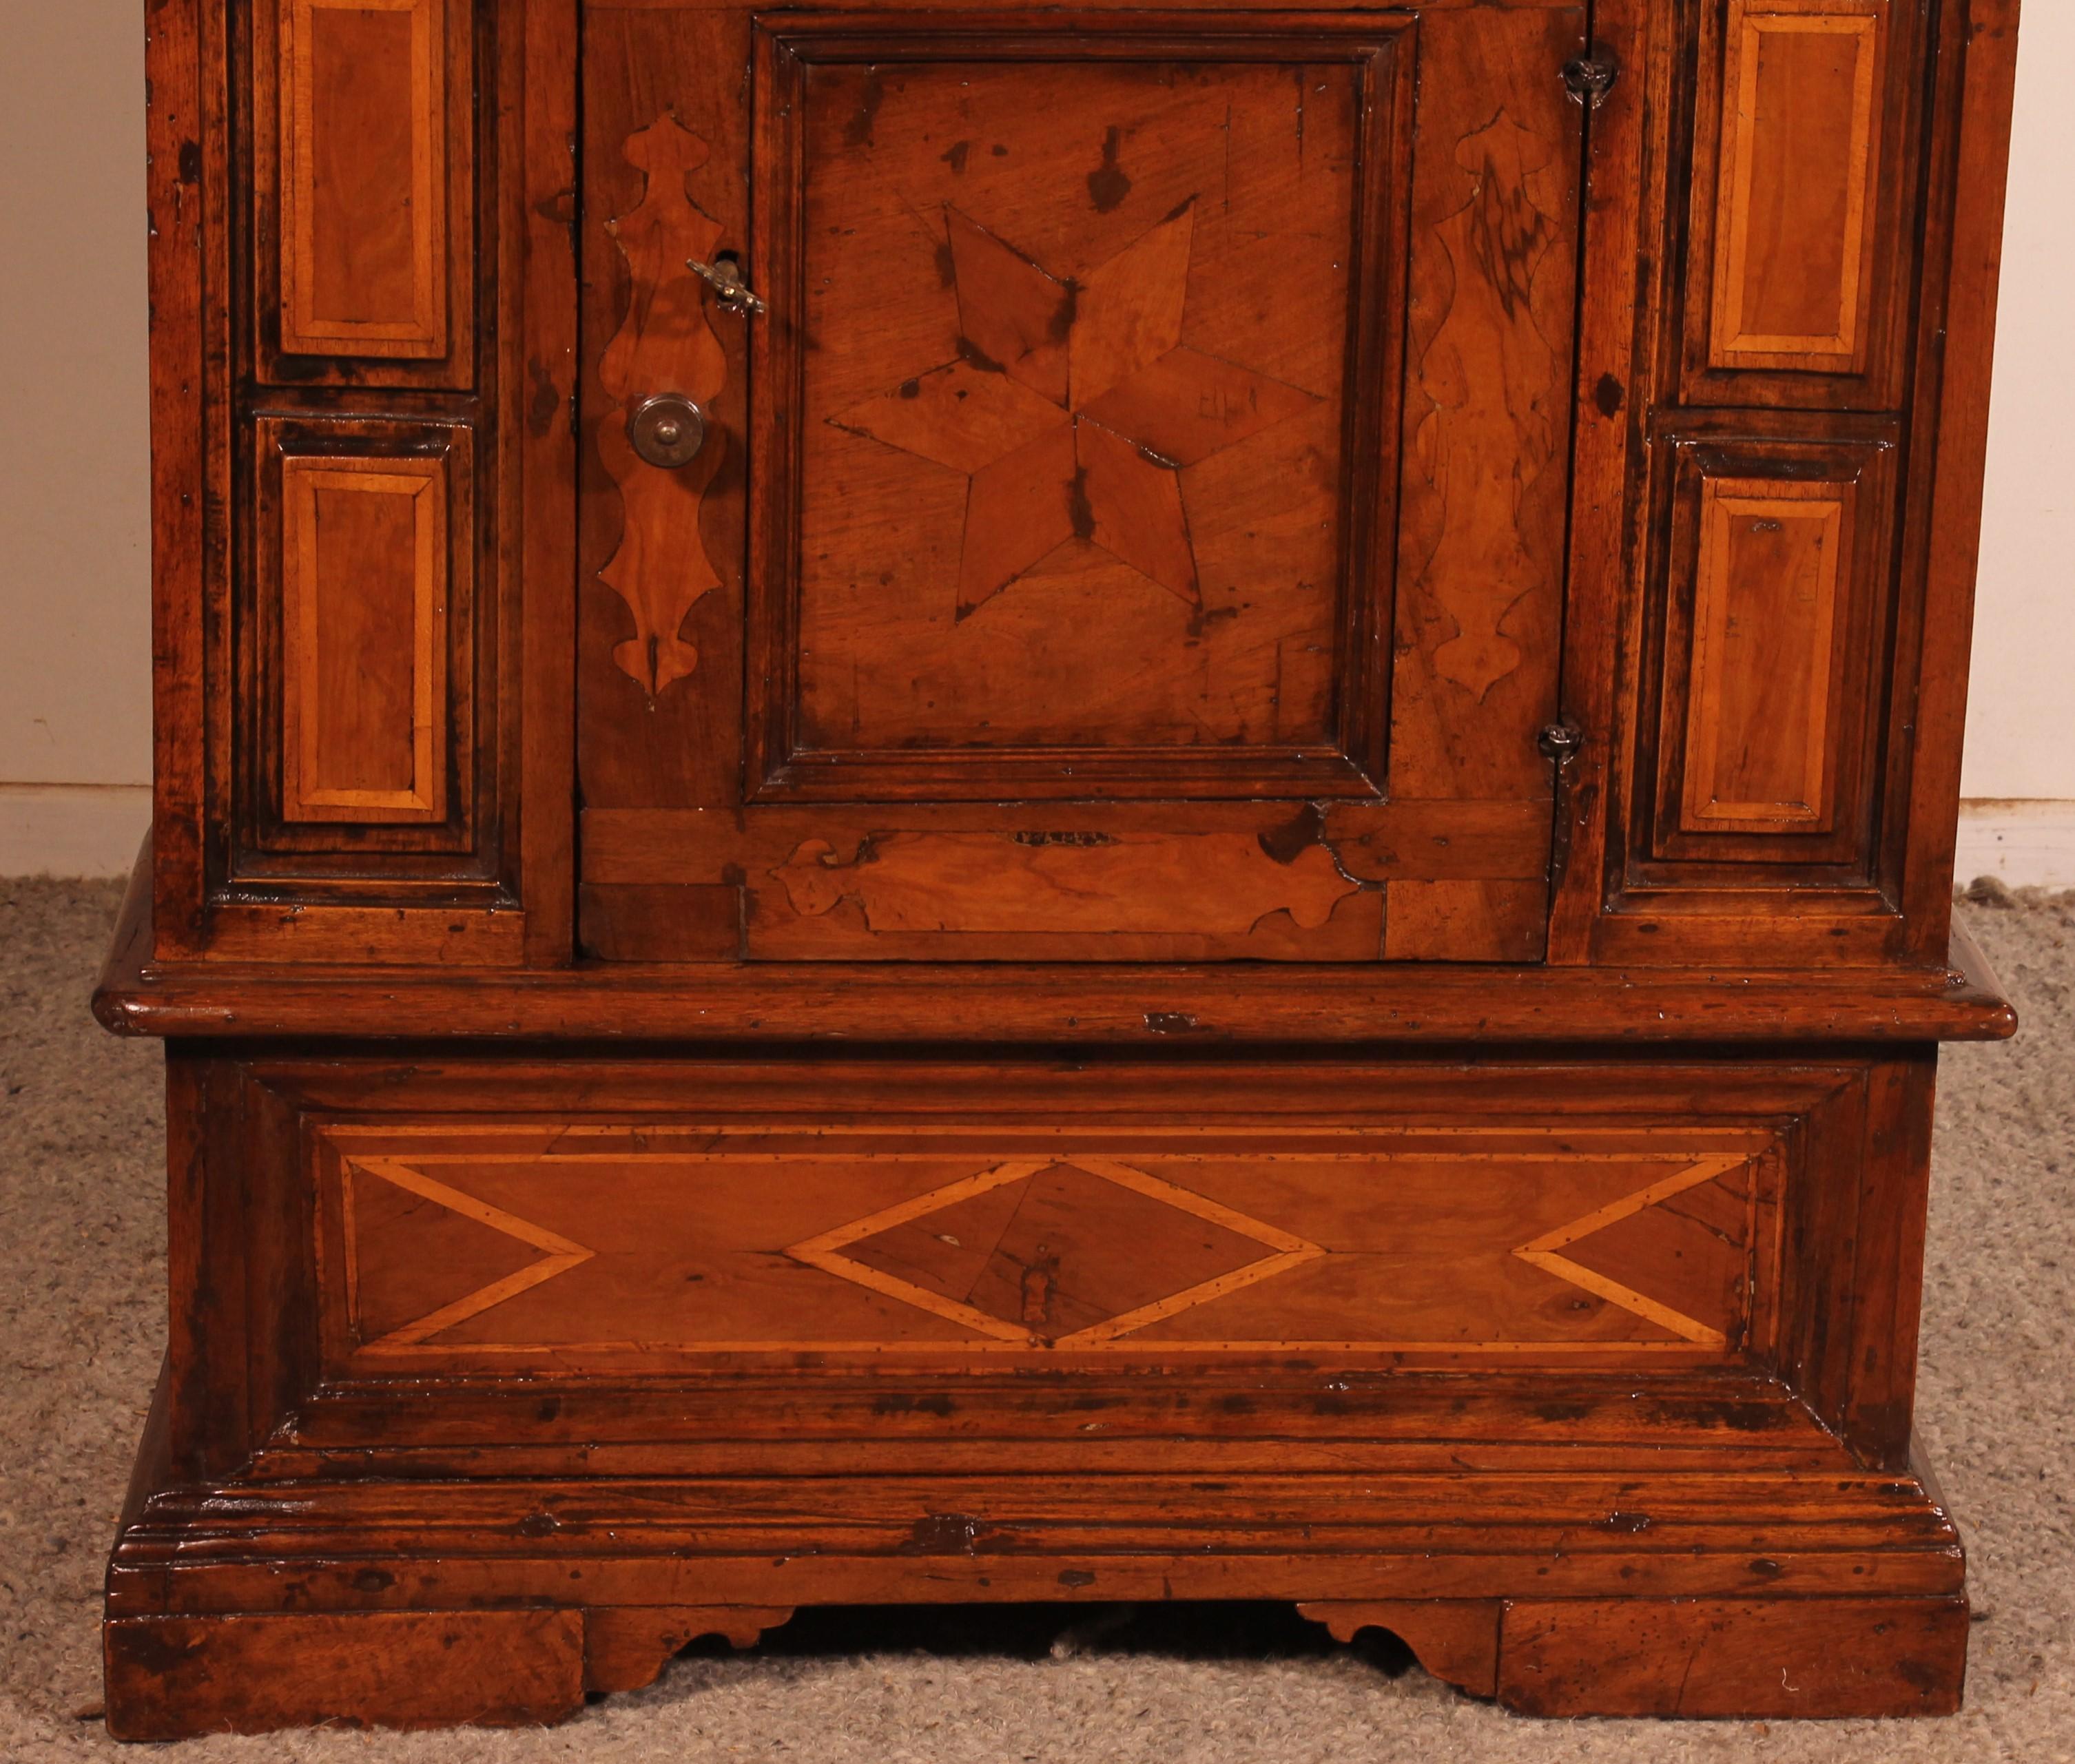 Elegant oratory or small sideboard in walnut from the beginning of the 17th century from italy

Very beautiful piece of furniture from the Italian Renaissance composed of a door with its lock and key and three drawers

Very beautiful top with a